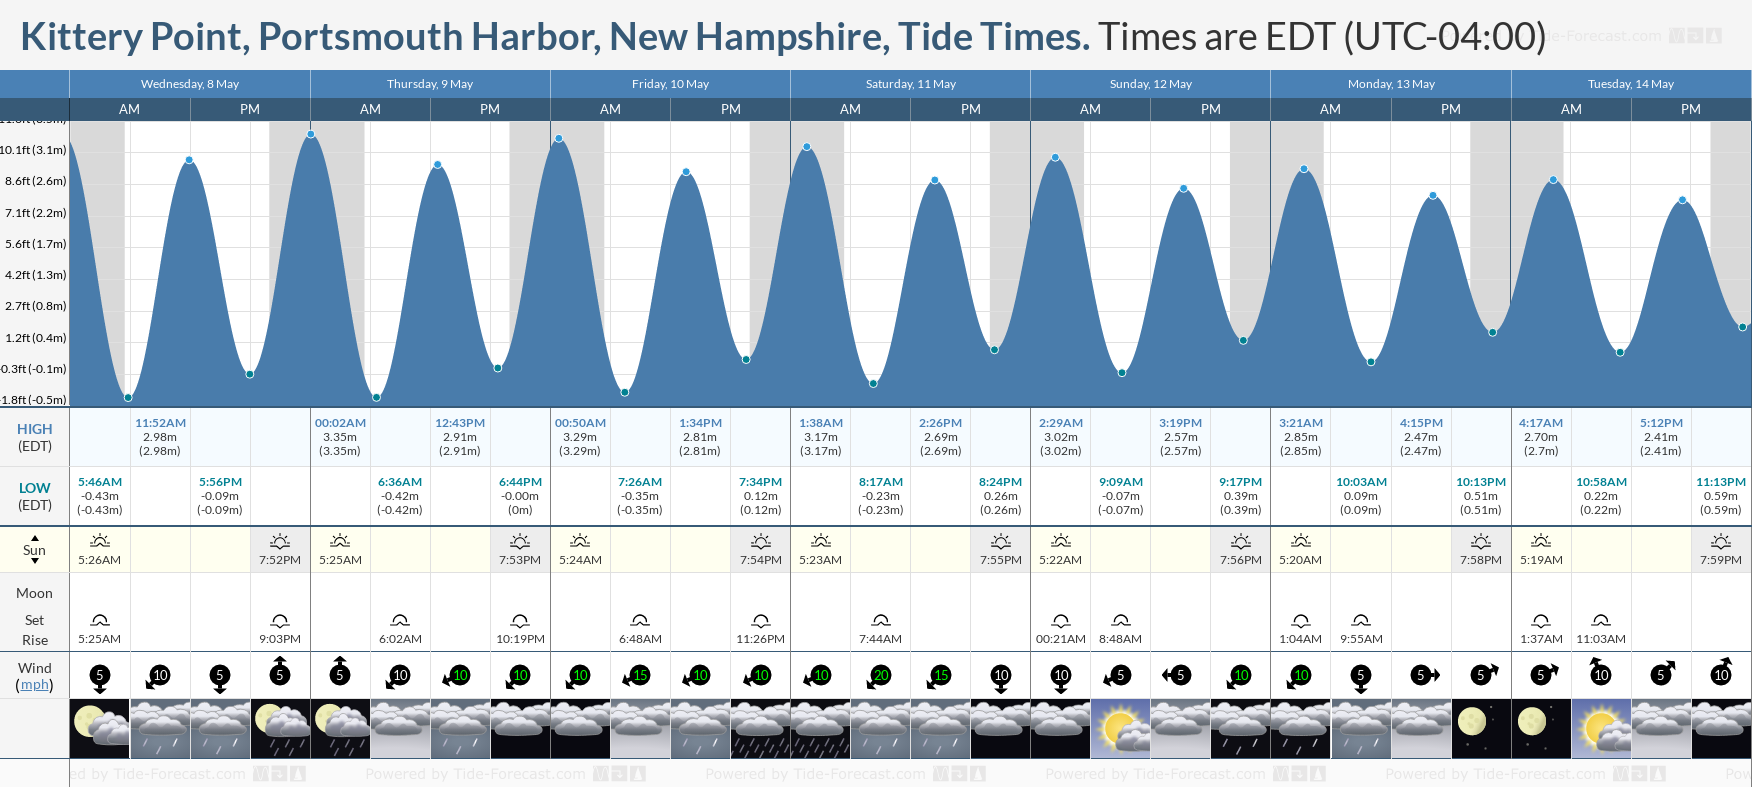 Kittery Point, Portsmouth Harbor, New Hampshire Tide Chart including high and low tide tide times for the next 7 days